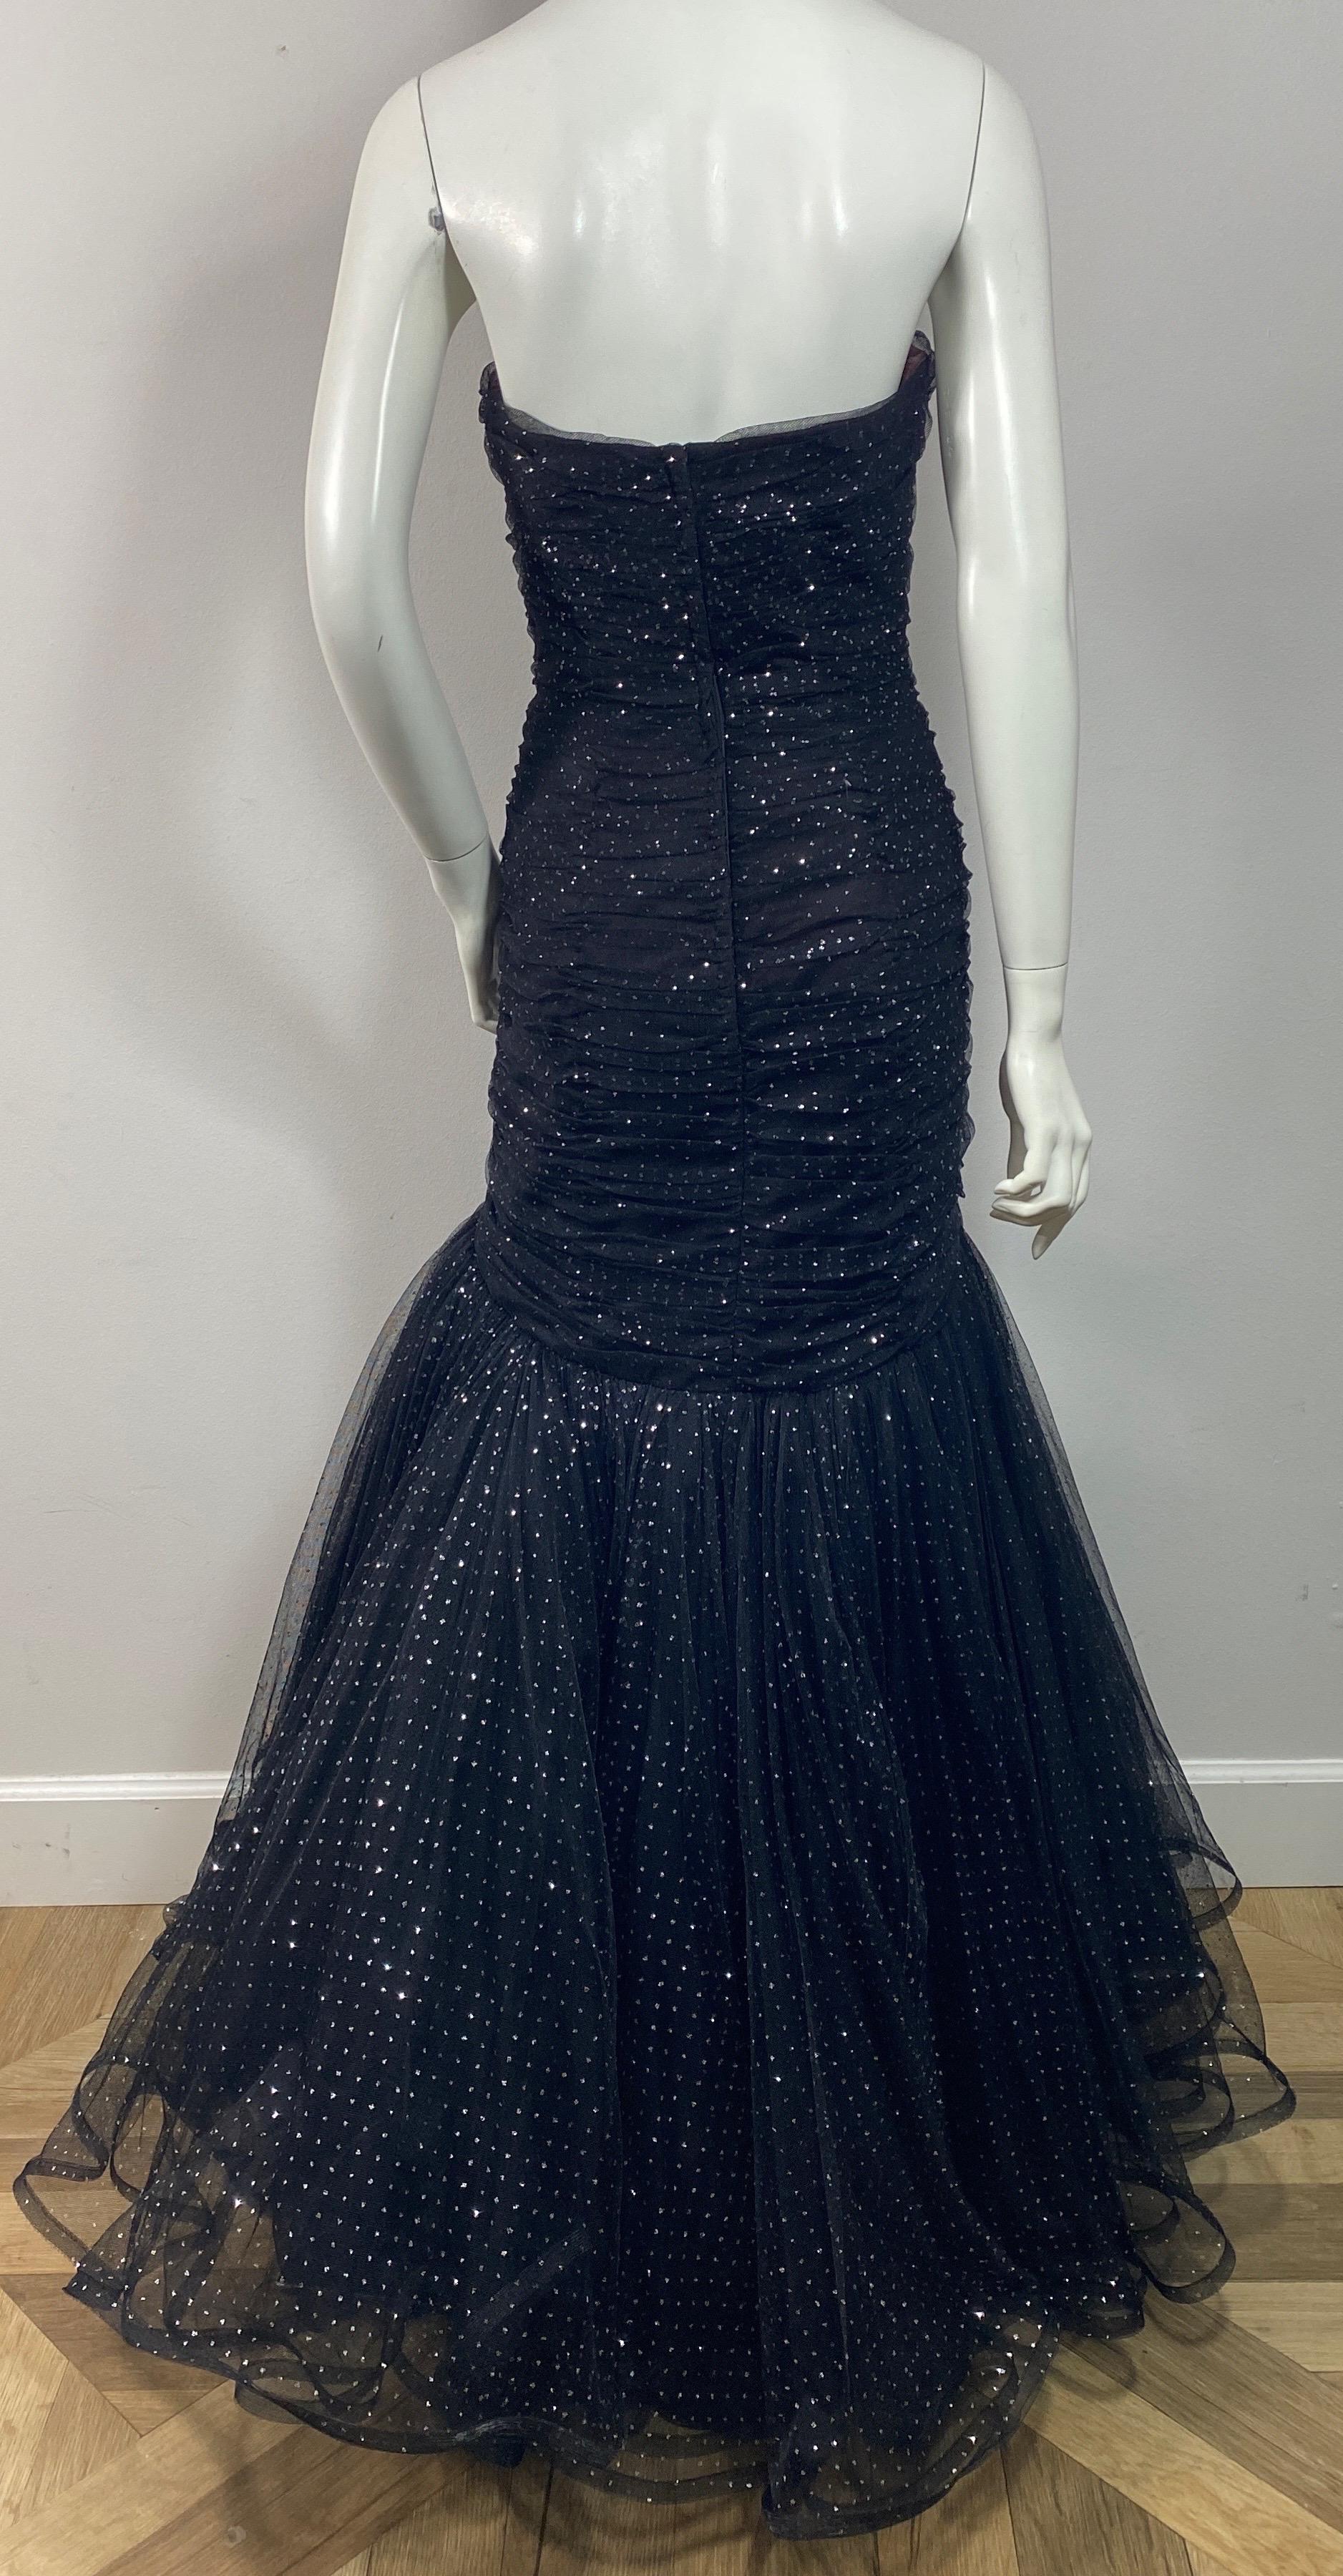 Murray Arbeid 1990 Black and Silver Tulle Gown with Shawl - Size 8 For Sale 7